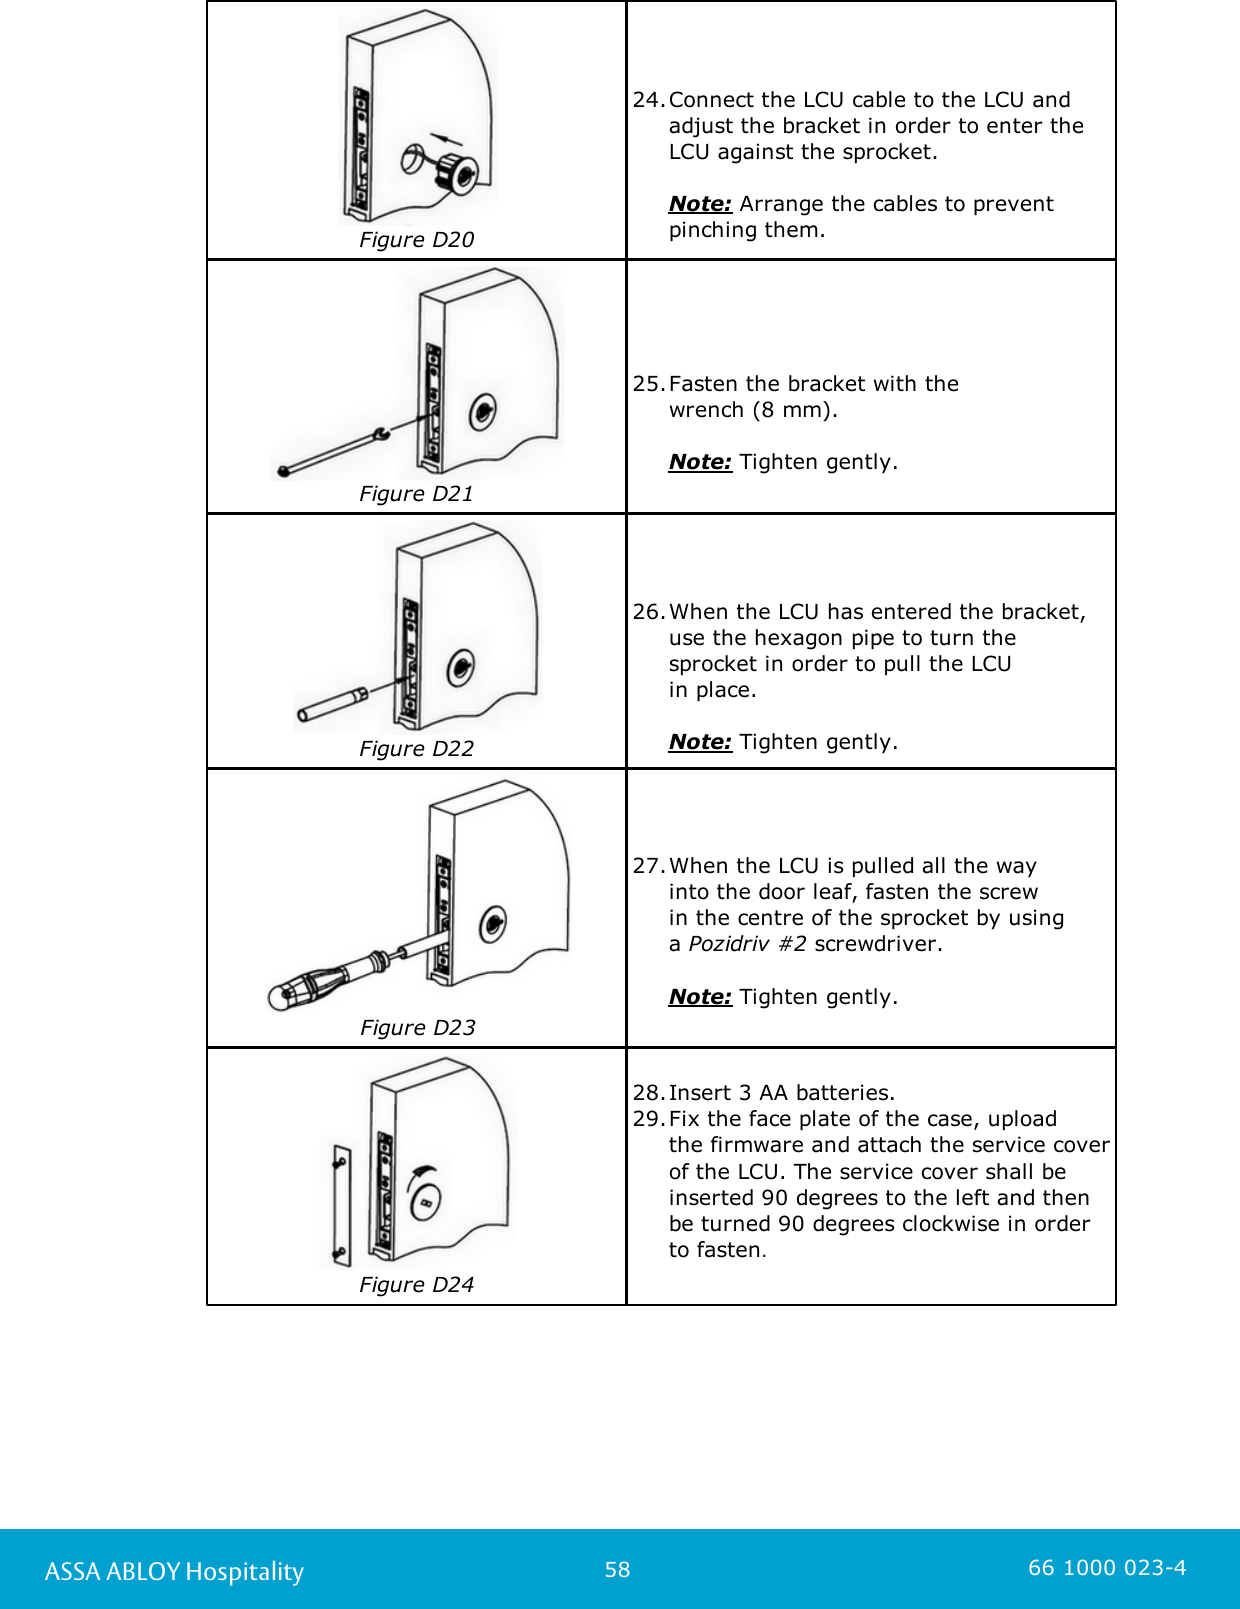 58ASSA ABLOY Hospitality 66 1000 023-4Figure D2024.Connect the LCU cable to the LCU andadjust the bracket in order to enter theLCU against the sprocket.      Note: Arrange the cables to preventpinching them.Figure D2125.Fasten the bracket with the wrench (8 mm).      Note: Tighten gently.Figure D2226.When the LCU has entered the bracket,use the hexagon pipe to turn thesprocket in order to pull the LCU in place.      Note: Tighten gently.Figure D2327.When the LCU is pulled all the way into the door leaf, fasten the screw in the centre of the sprocket by using a Pozidriv #2 screwdriver.      Note: Tighten gently.Figure D2428.Insert 3 AA batteries. 29.Fix the face plate of the case, upload the firmware and attach the service coverof the LCU. The service cover shall beinserted 90 degrees to the left and thenbe turned 90 degrees clockwise in orderto fasten. 